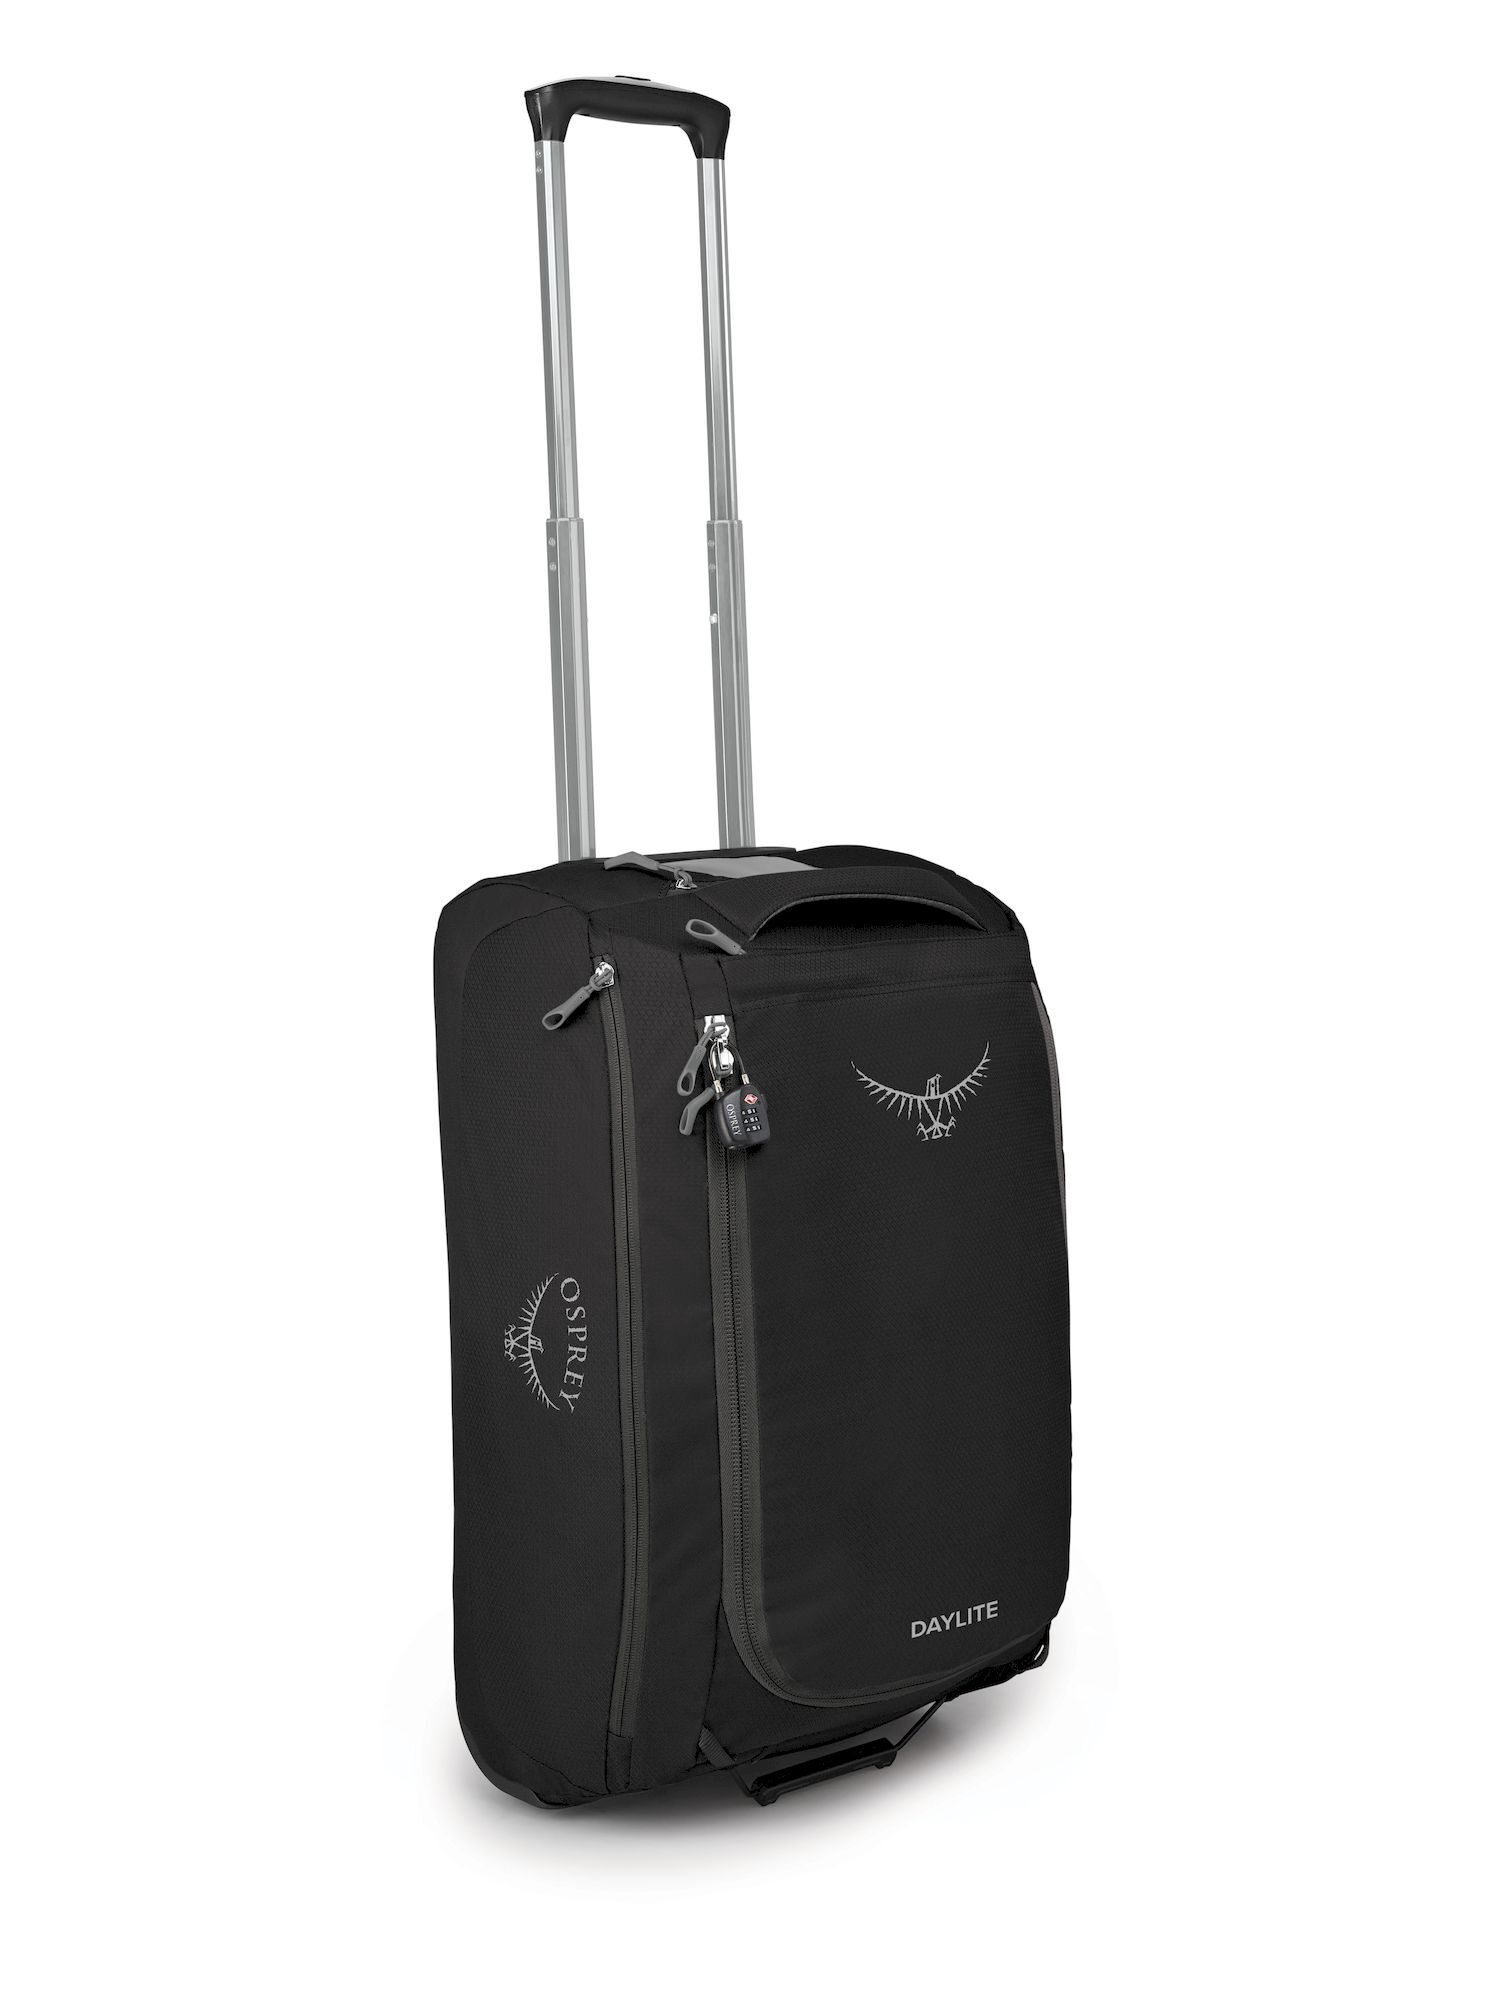 Osprey Daylite Carry-On Whld Duffel 40 - Sac de voyage à roulettes | Hardloop